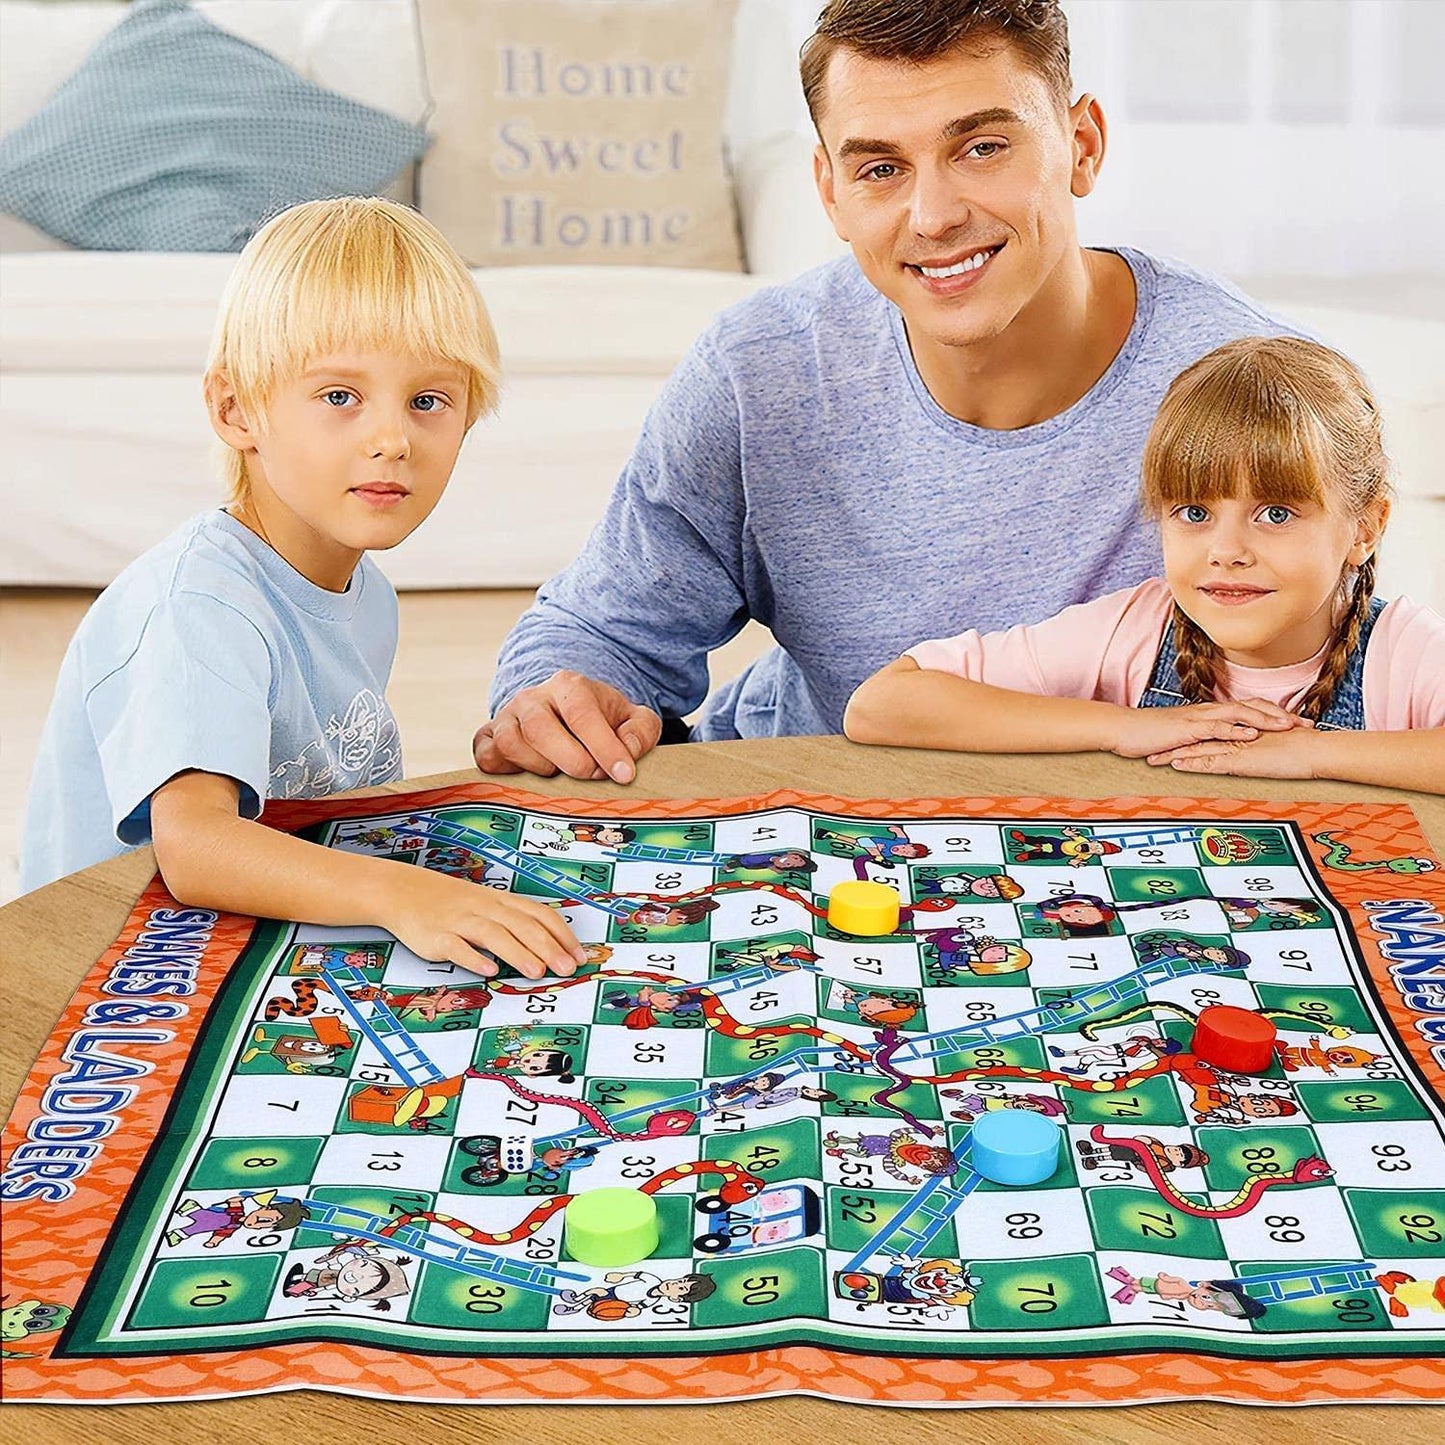 Giant Snakes & Ladder Ludo Chess Board Game Playmat Outdoor Fun - Home Inspired Gifts